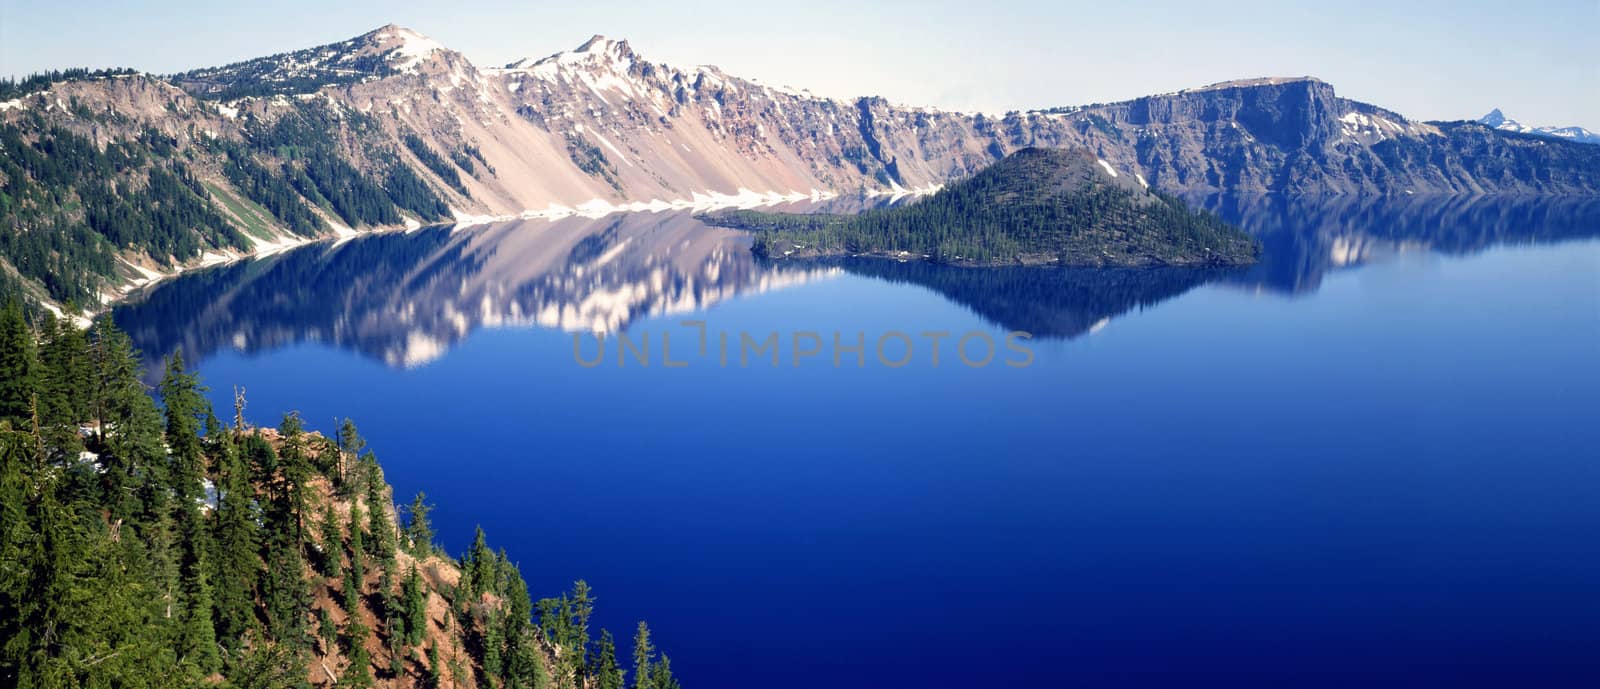 Crater Lake by jol66